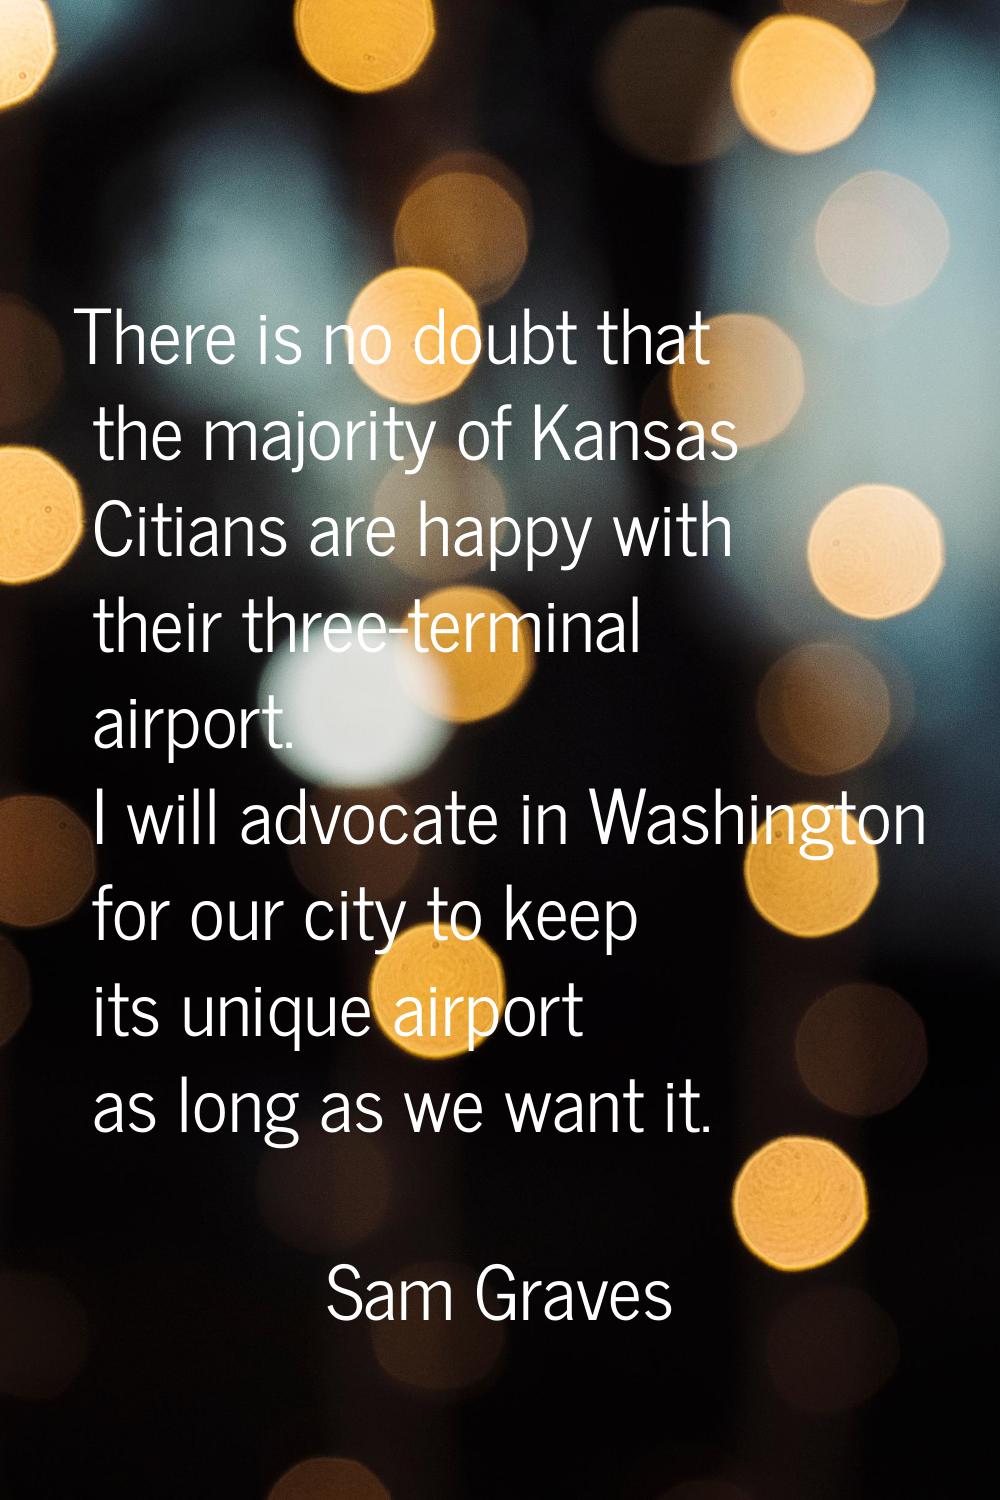 There is no doubt that the majority of Kansas Citians are happy with their three-terminal airport. 